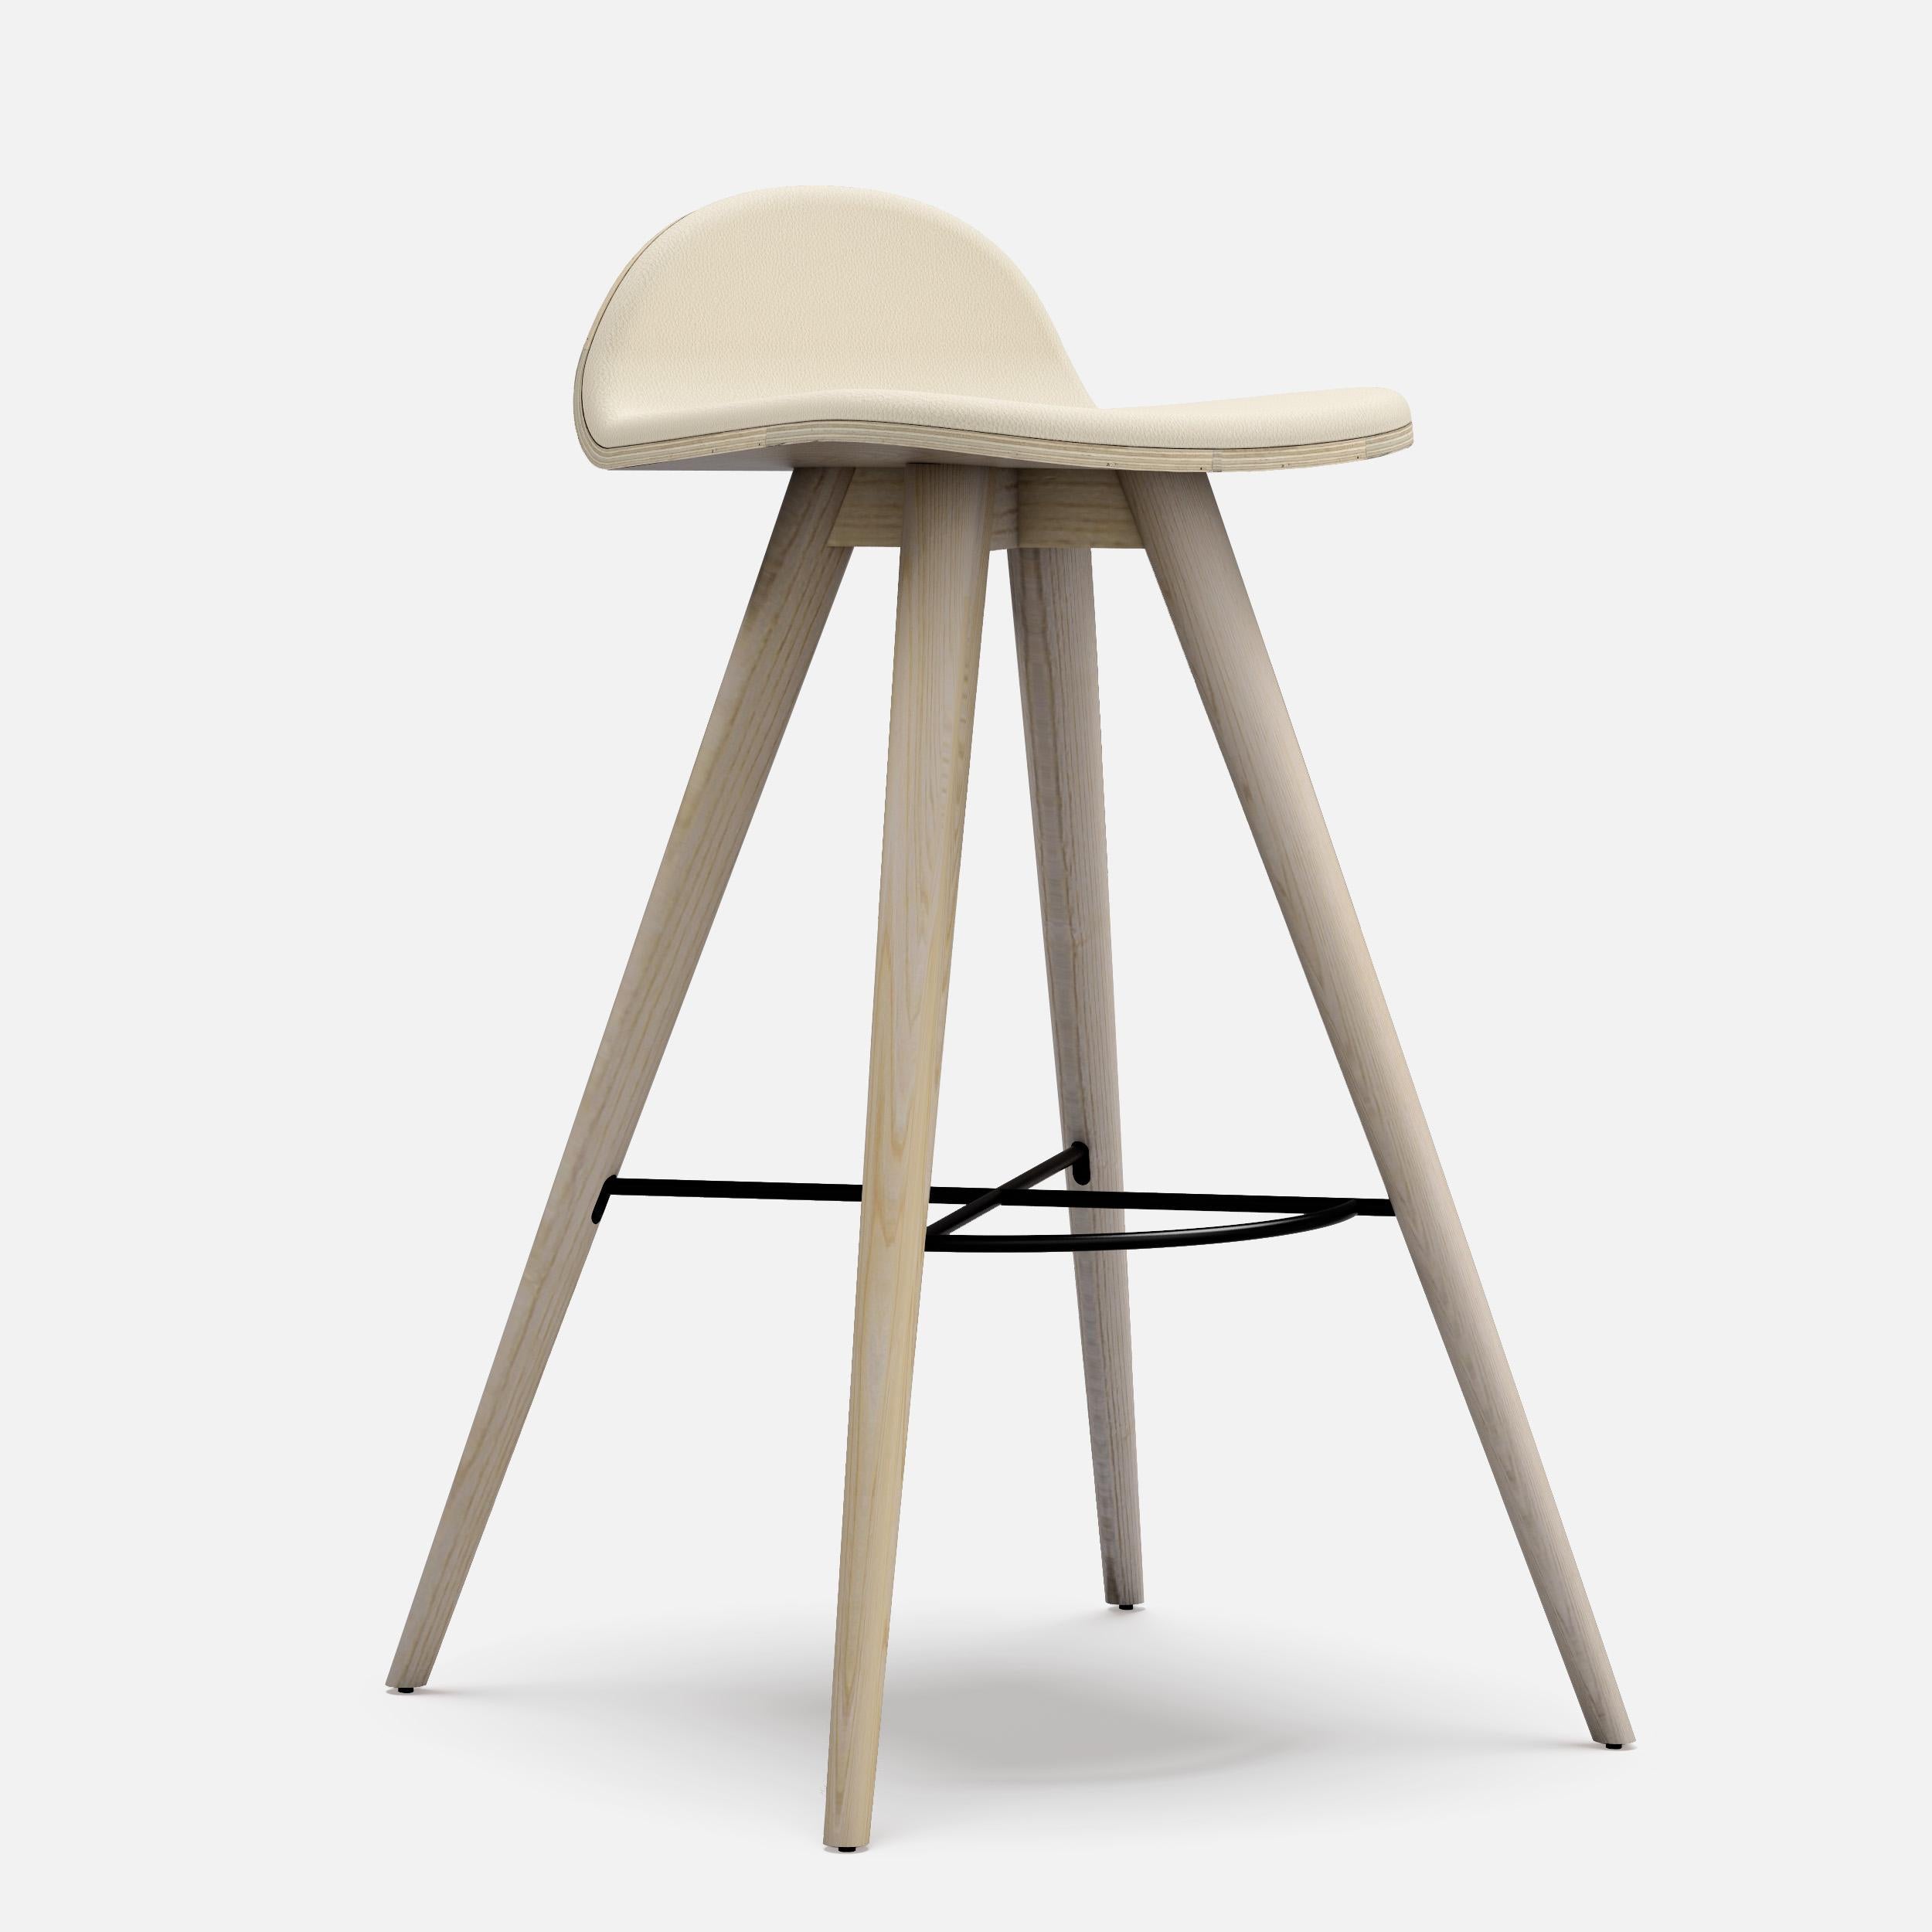 Ash and fabric contemporary high stool by Alexandre Caldas
Dimensions: W 51 x D 46 x H 100 cm
Materials: Ash and fabric

Structure also available in beech, ash, oak and mix wood
Seat also available in fabric, leather and corkfabric.
 